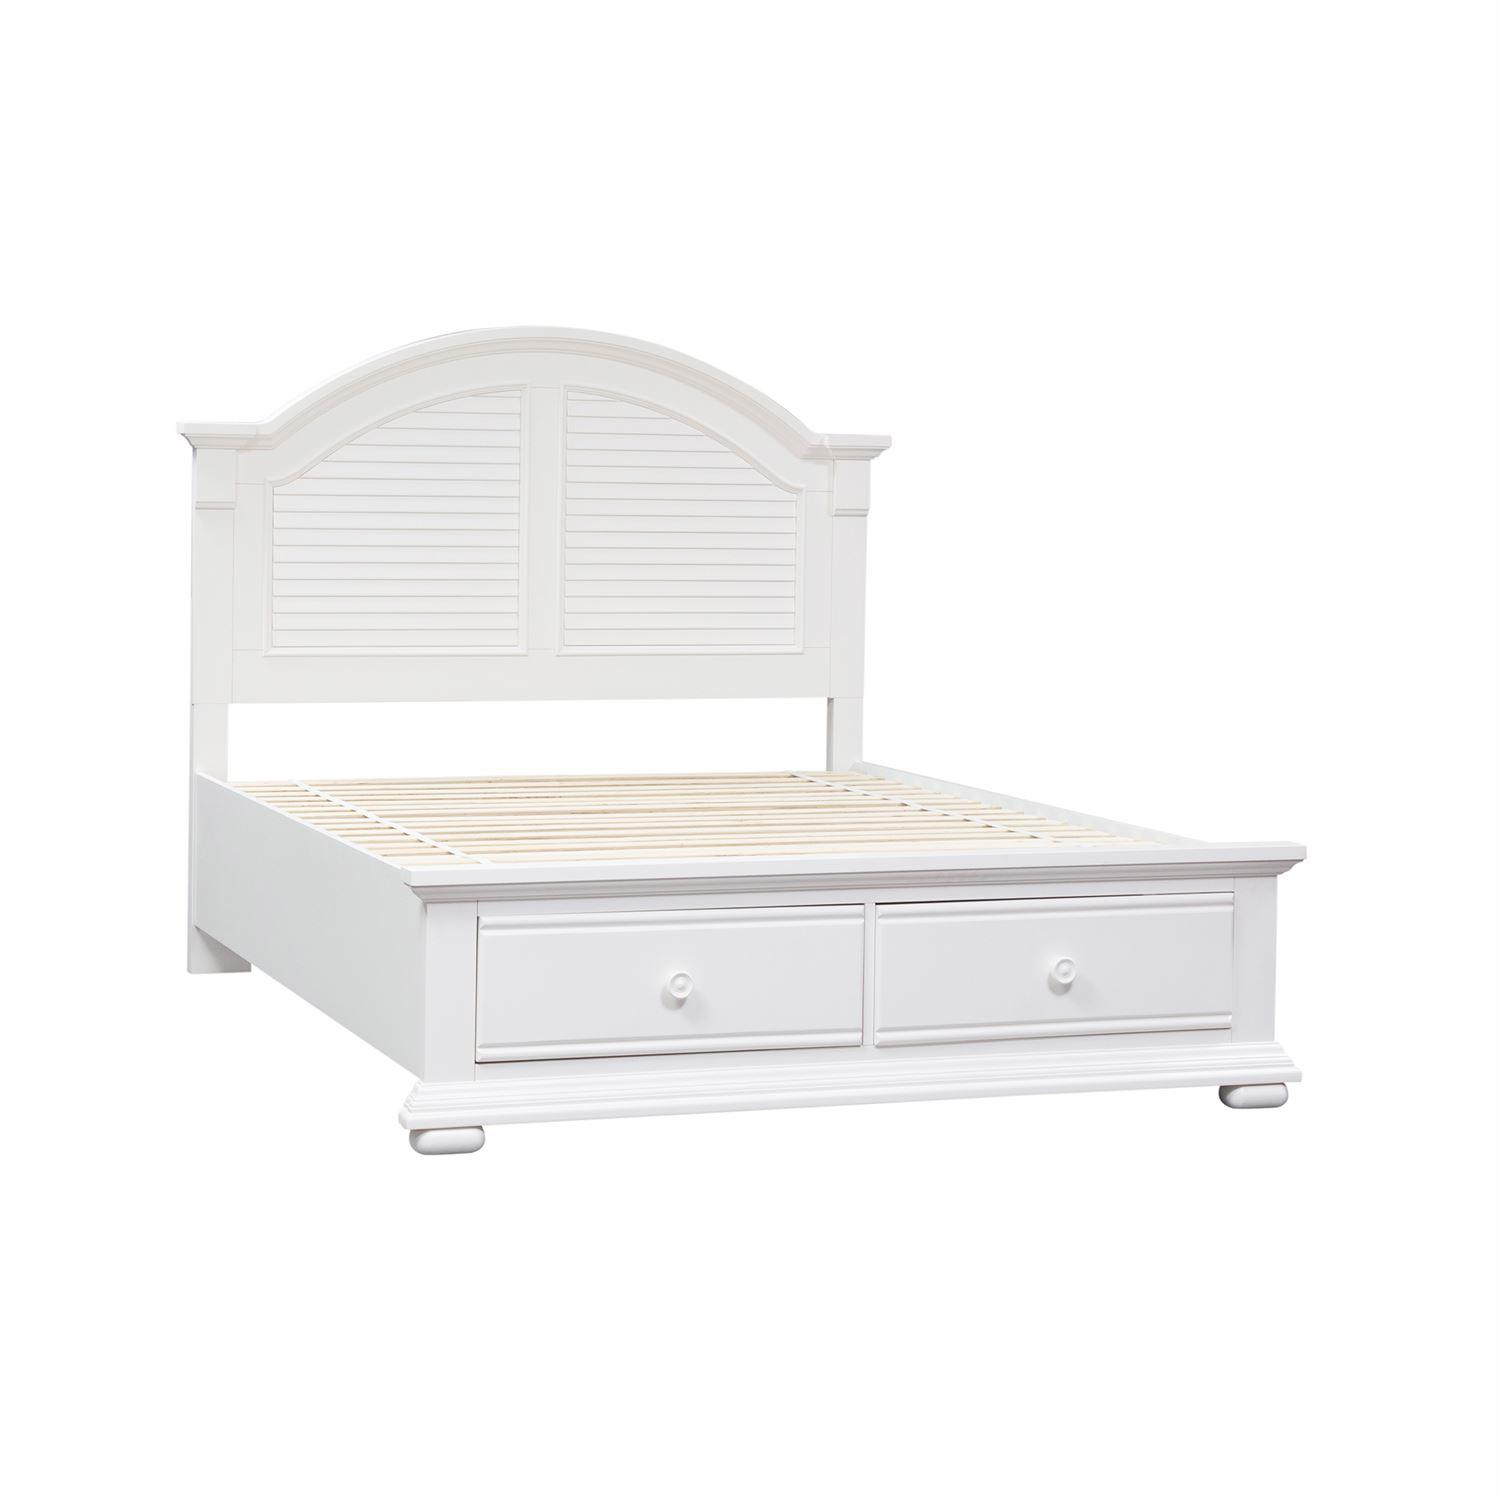 

    
Liberty Furniture Summer House I  (607-BR) Storage Bed Storage Bed White 607-BR-QSB
